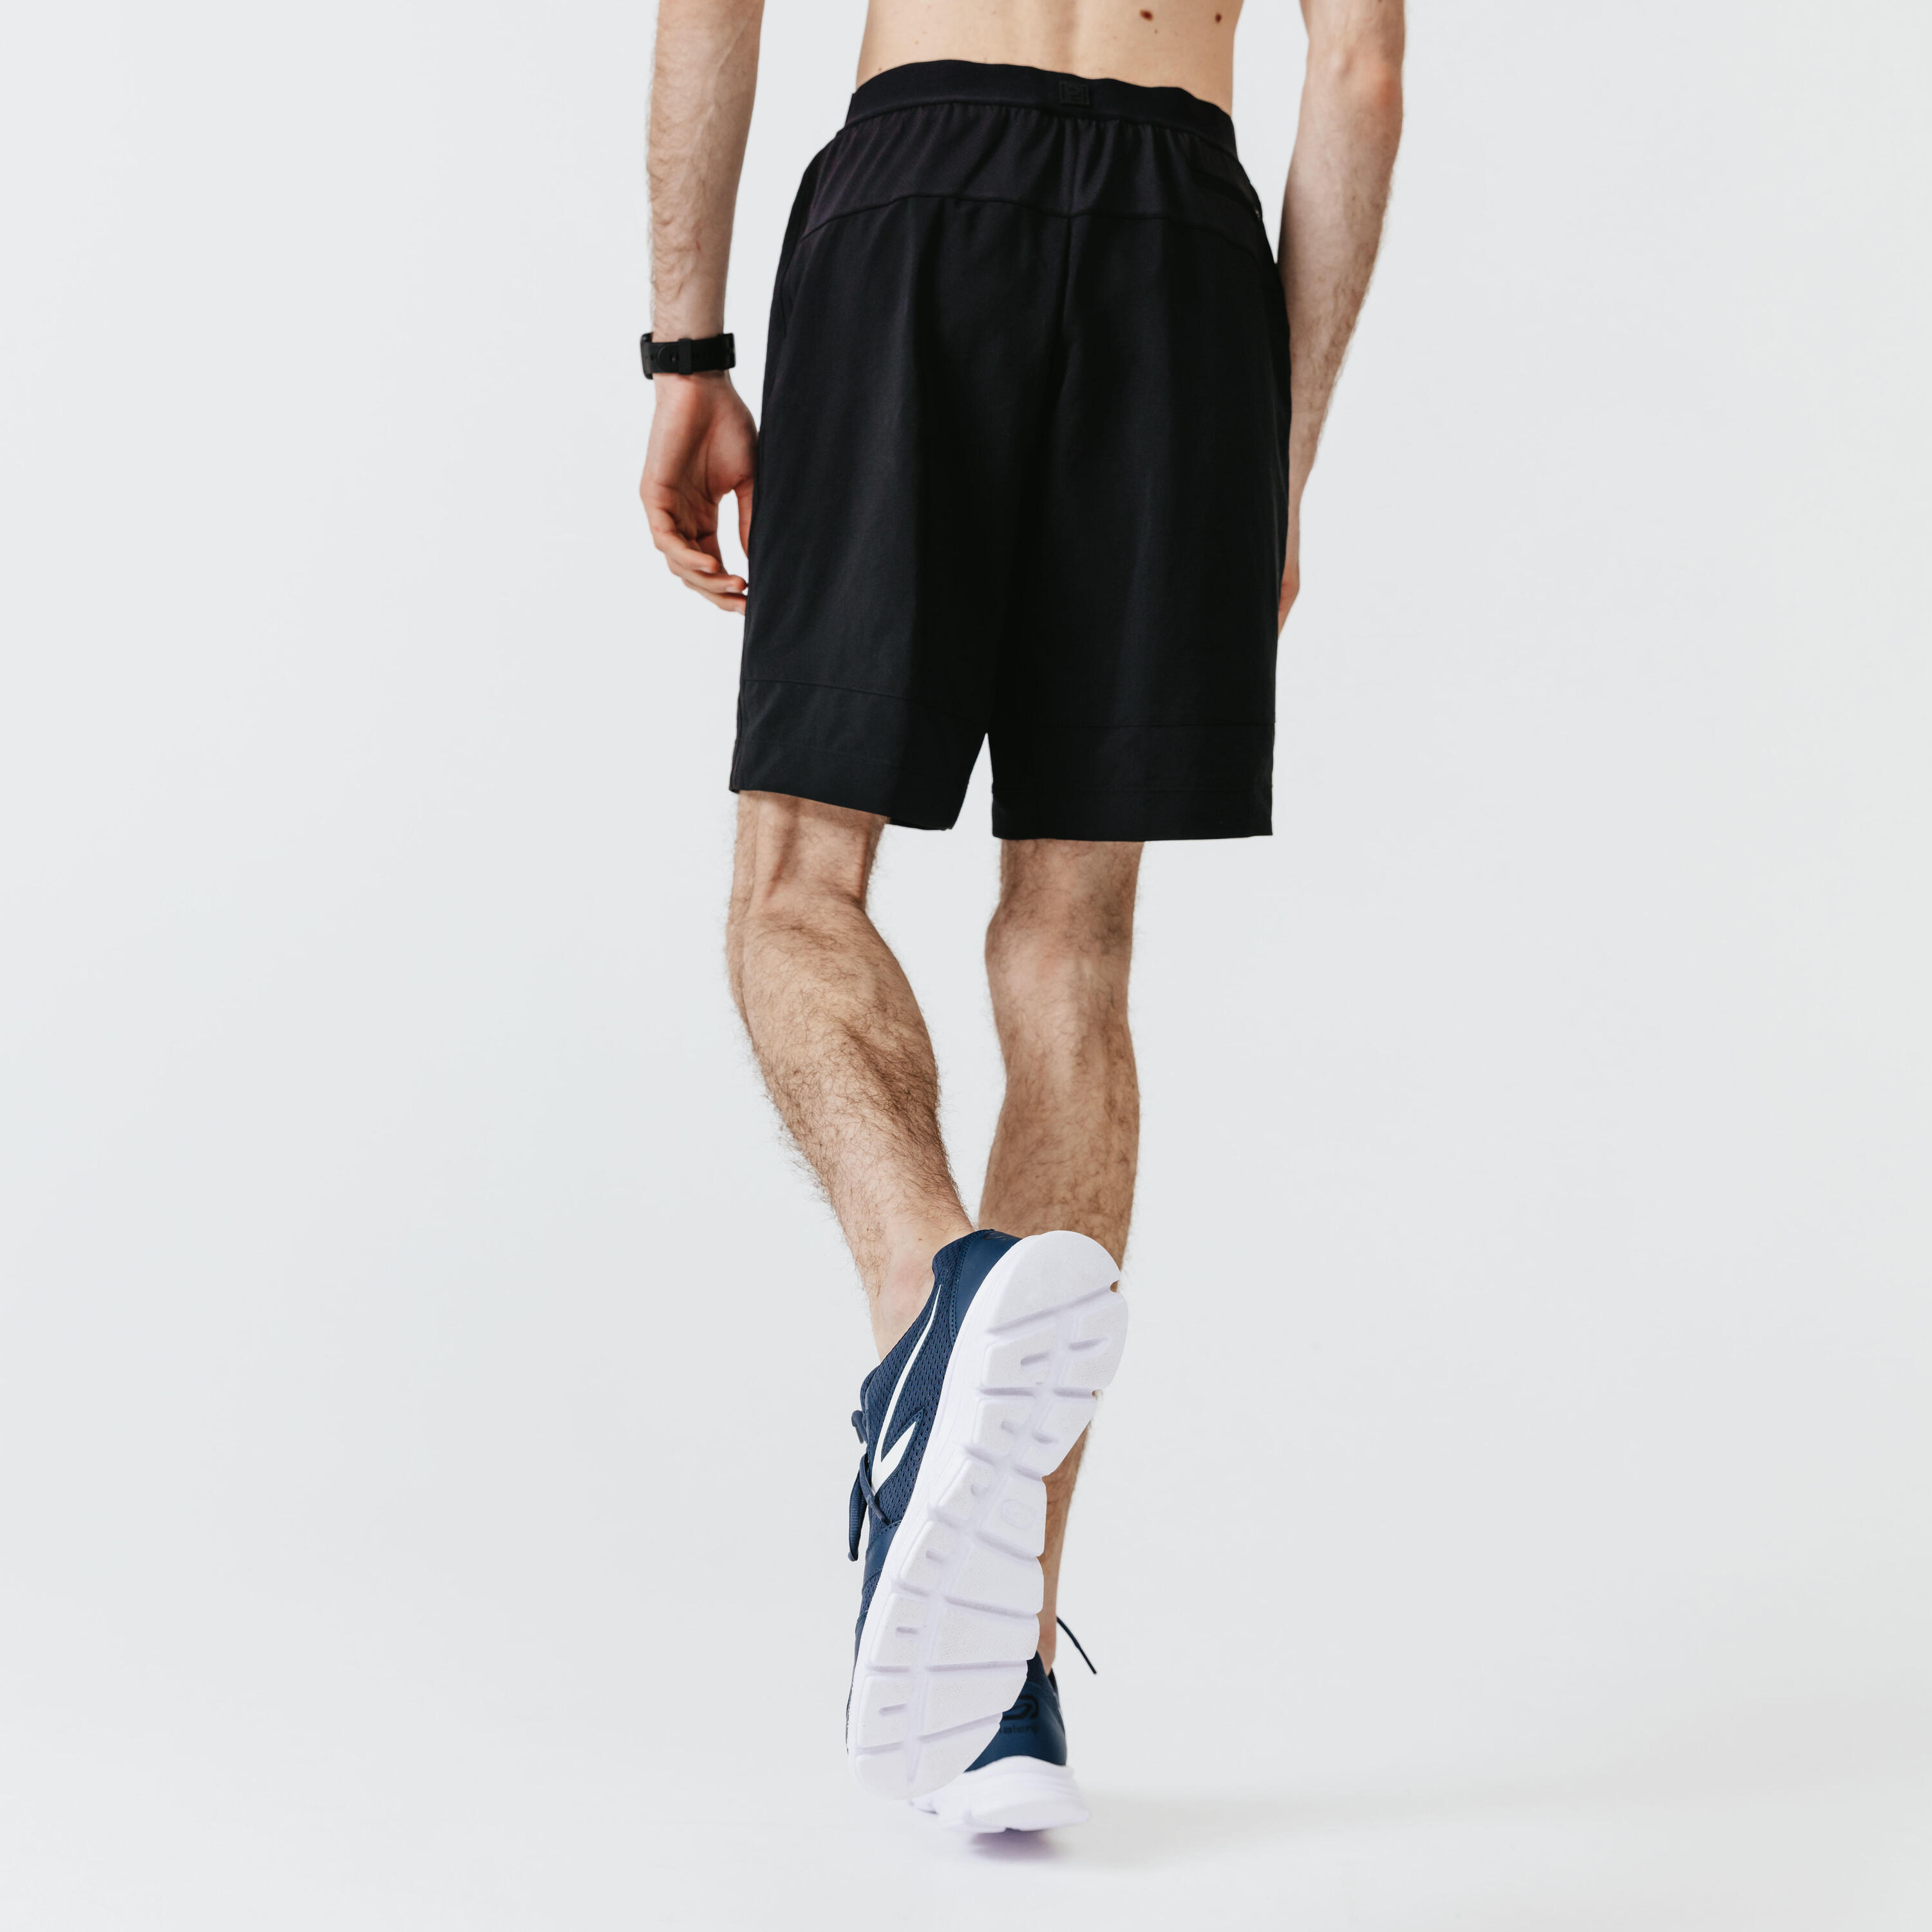 Dry+ Men's Running 2-in-1 Shorts With Boxer - Black 7/8